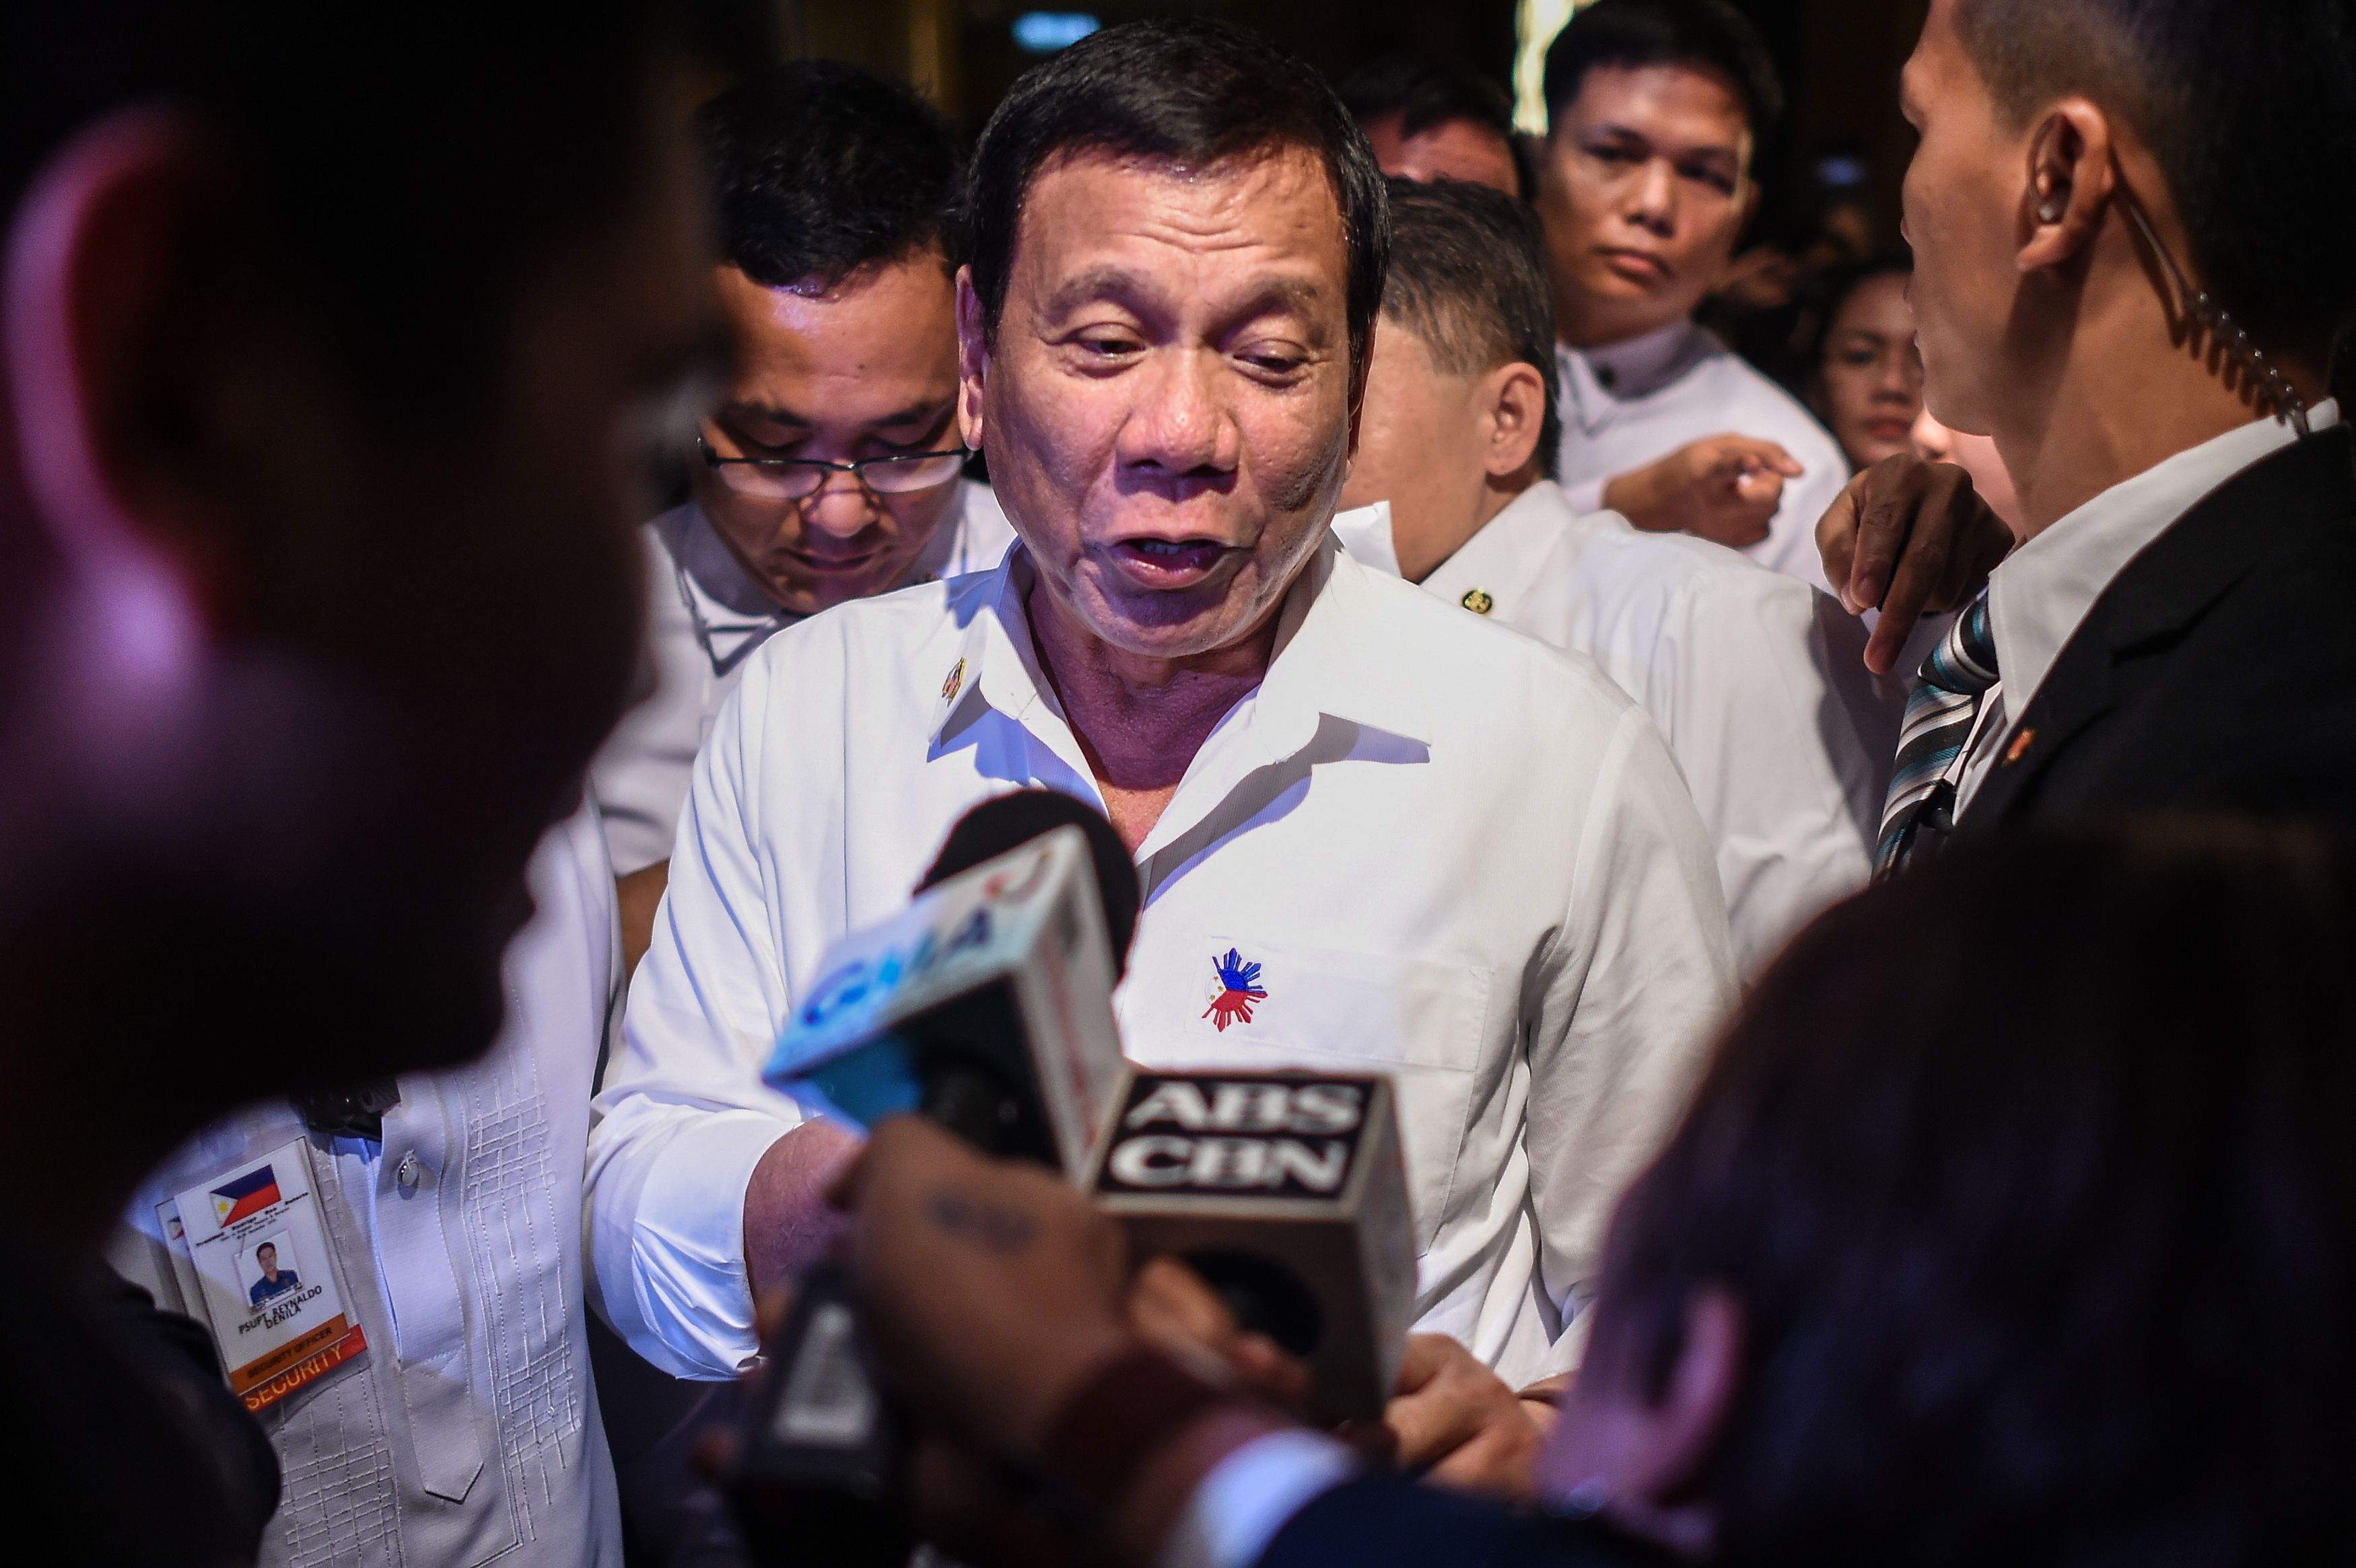 Philippine's President Rodrigo Duterte speaks to media after meeting with  Philippine nationals living in Malaysia during an official visit in Kuala Lumpur on Nov. 9, 2016. (Mohd Rasfan—AFP/Getty Images)